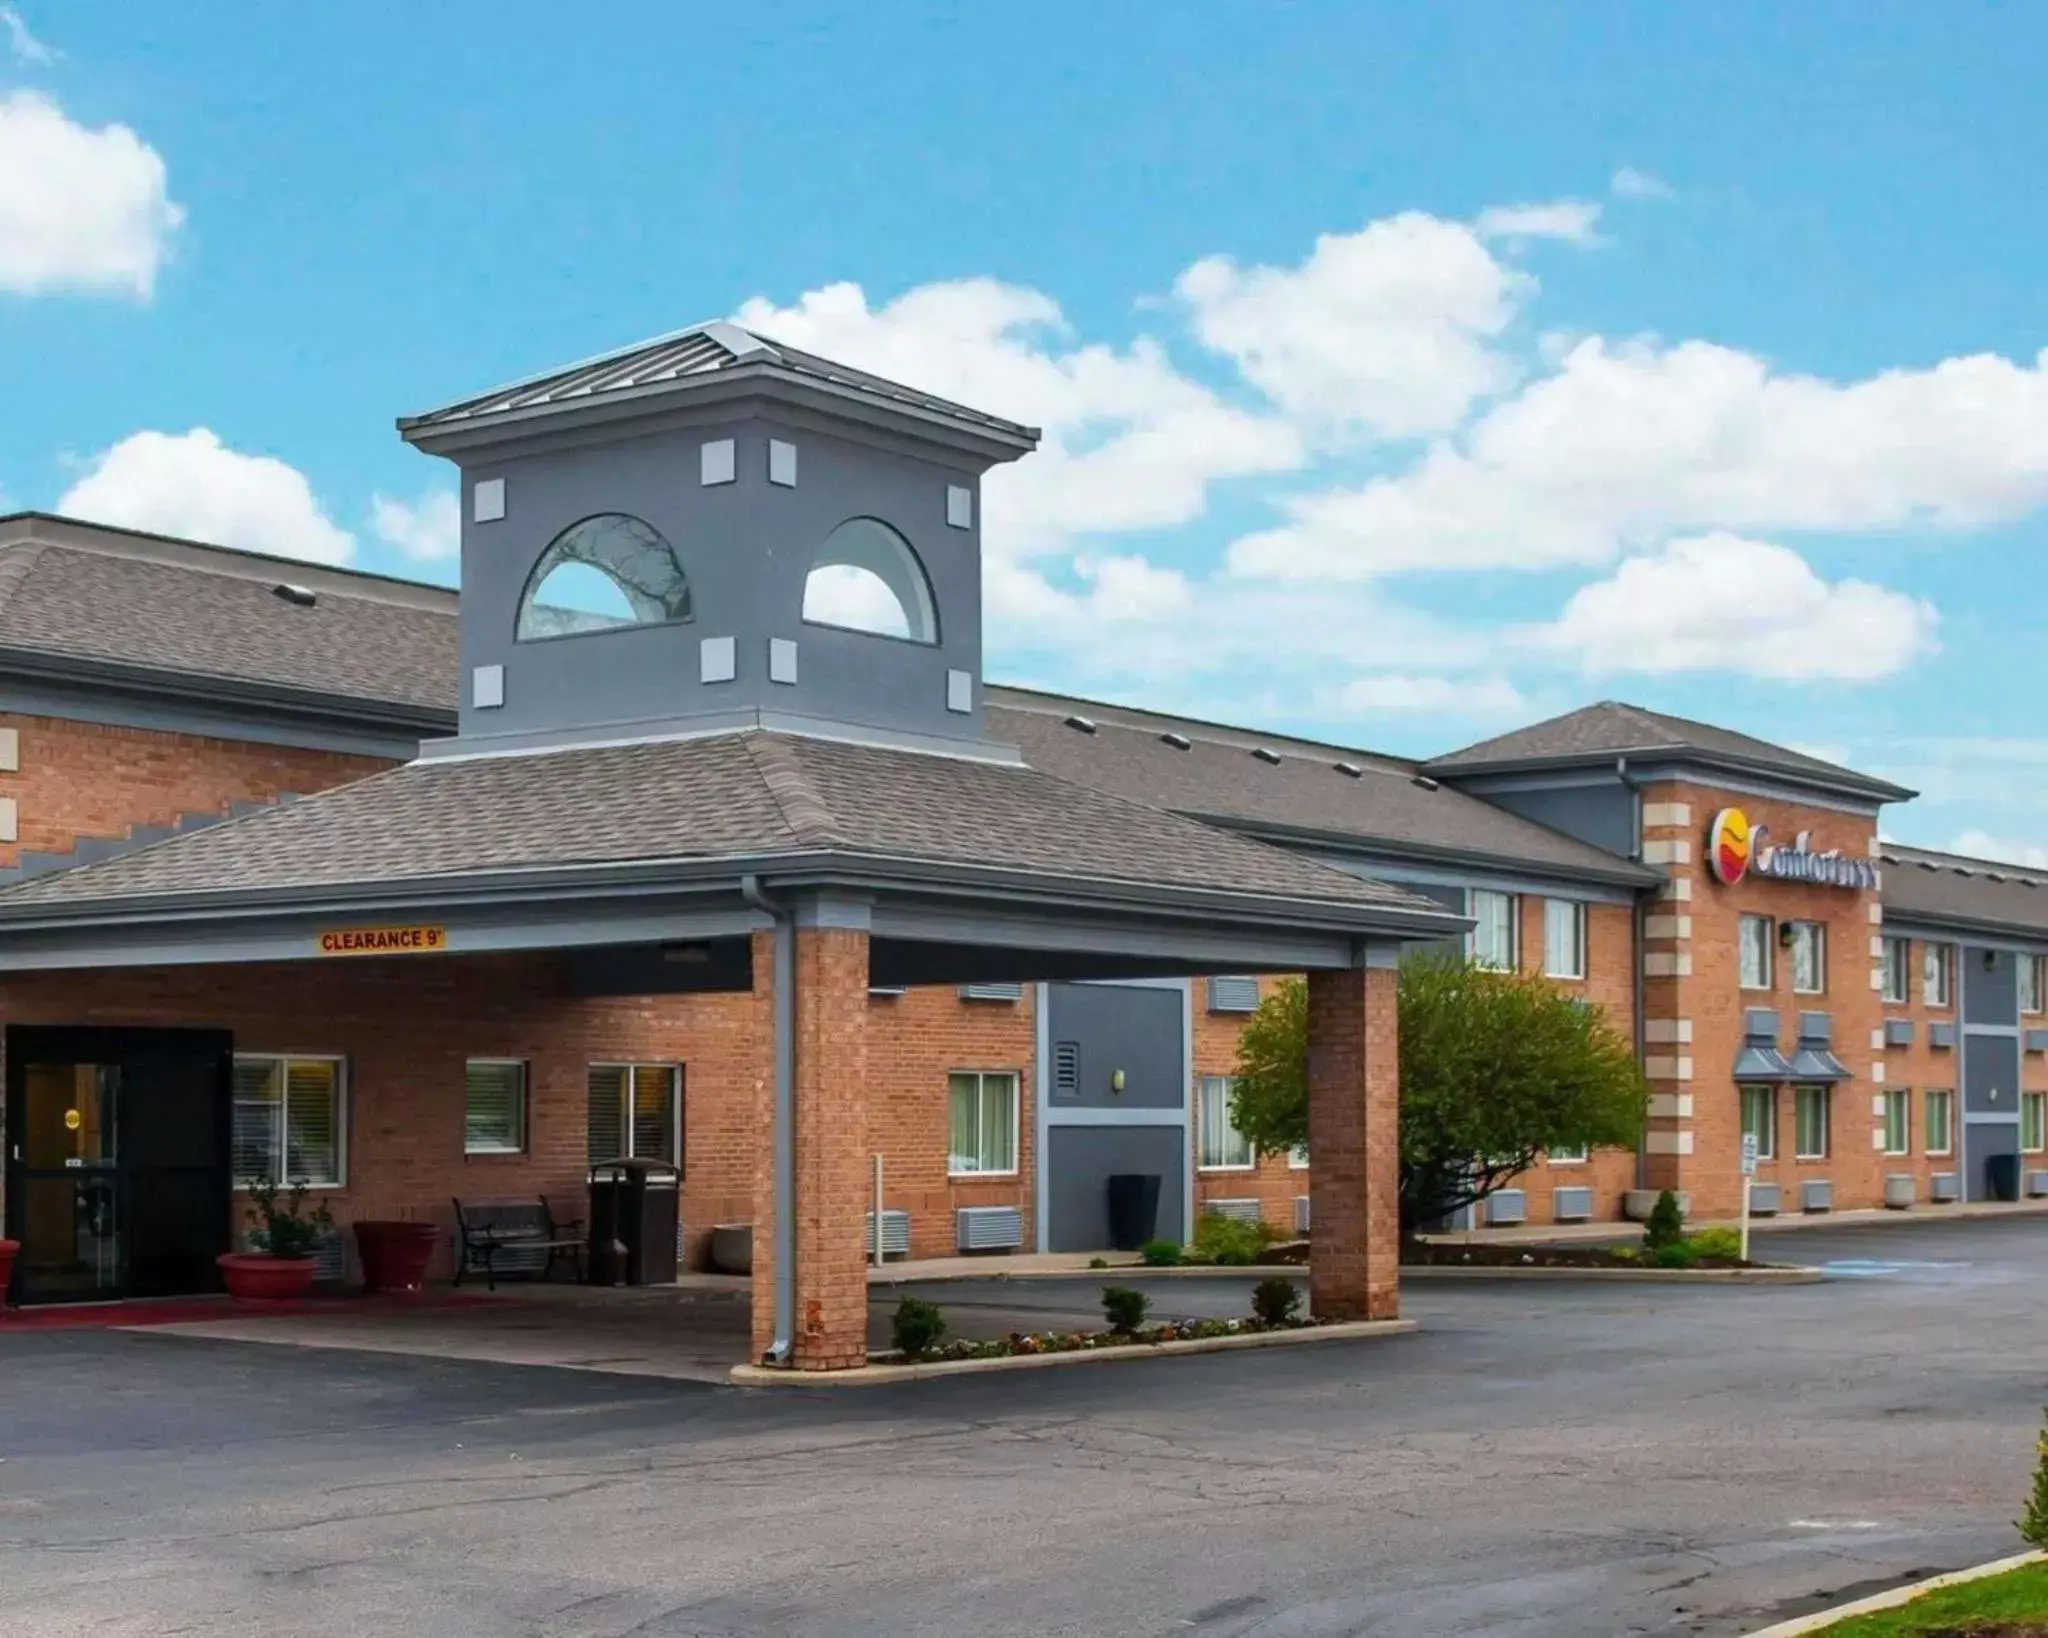 Property Building in Comfort Inn Indianapolis South I-65